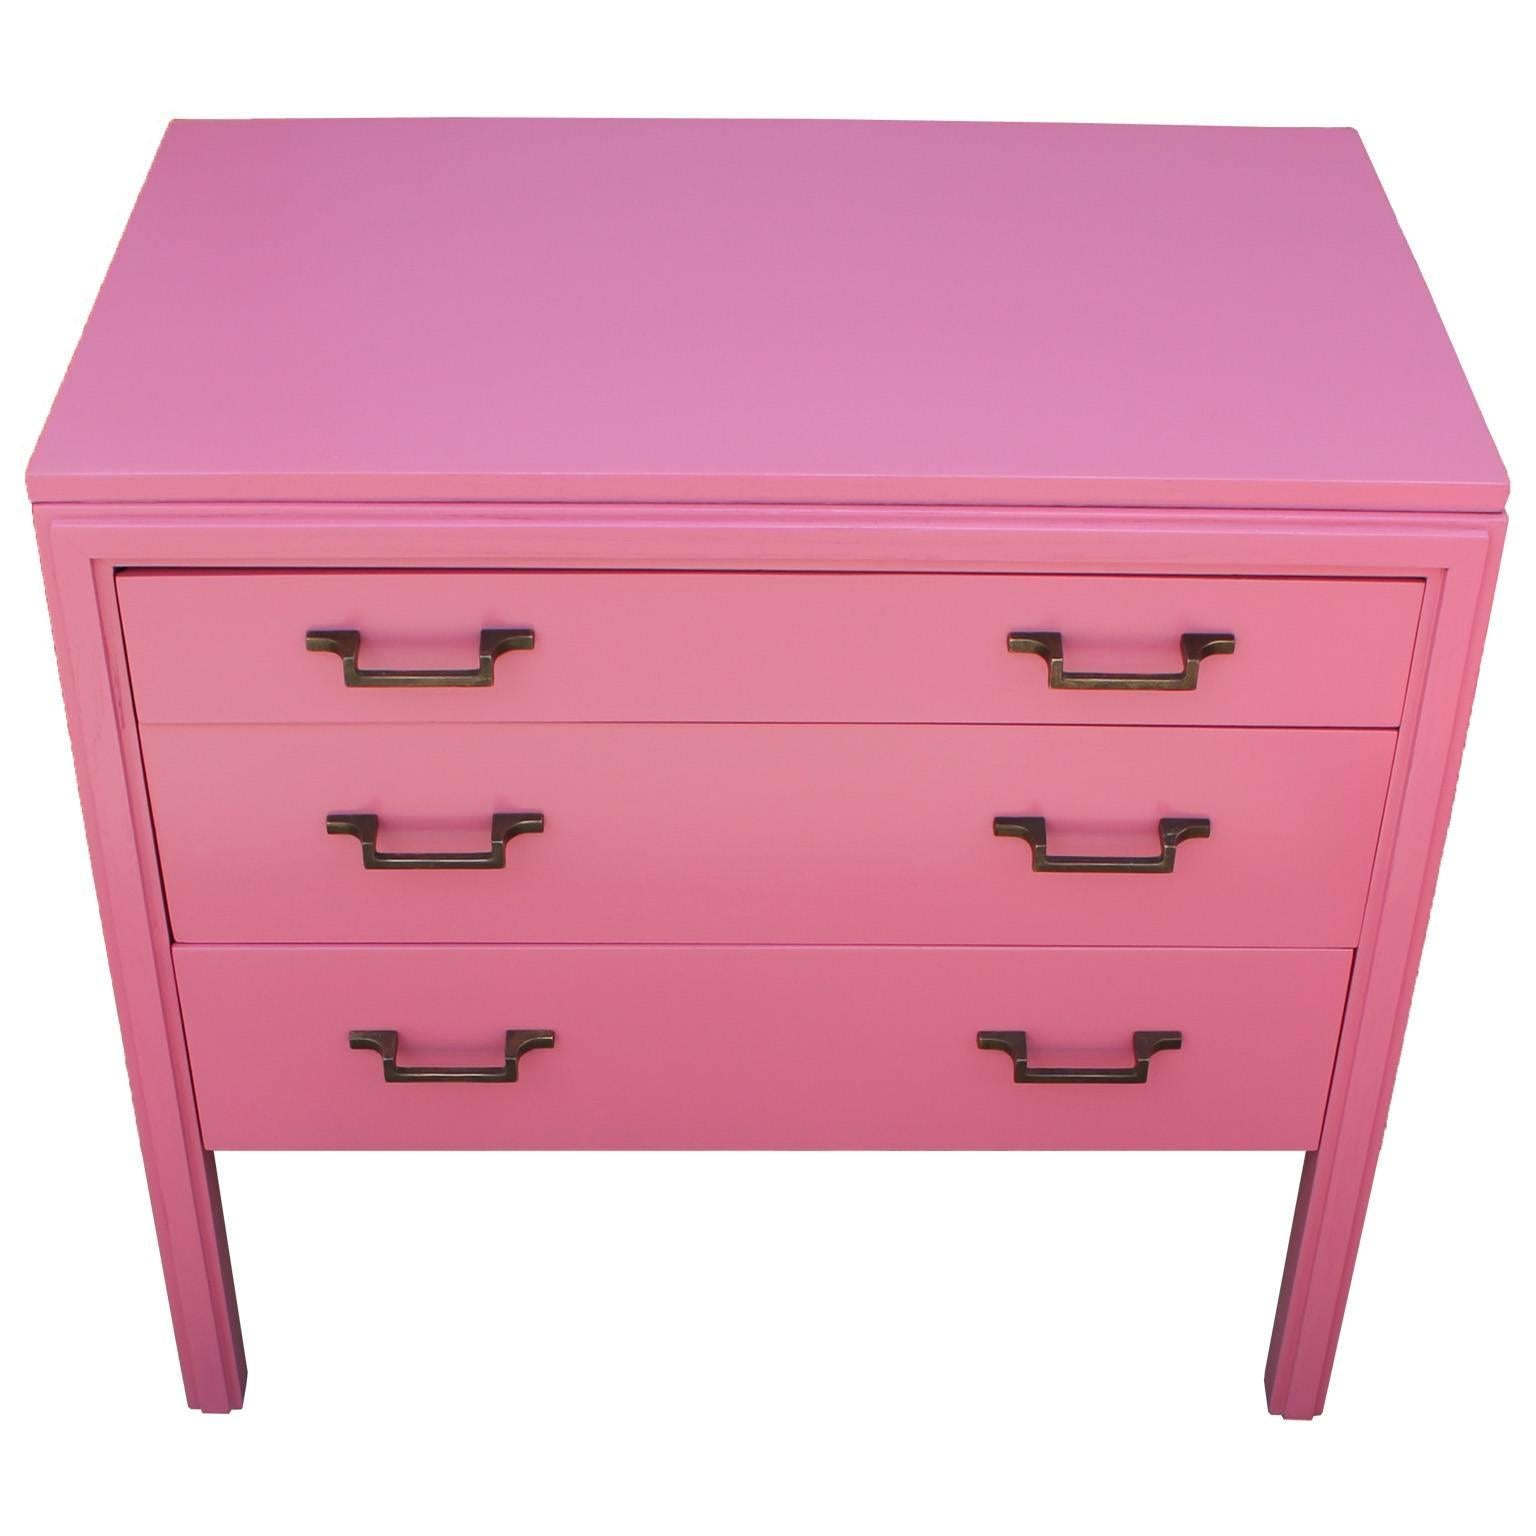 Sweet pair of bachelor's chest or night stands freshly lacquered in an ultra-smooth pink. Three drawers provide storage and long legs keep the pieces feeling light. Simple brass hardware with a heavy patina. Perfect pop of color to any space.